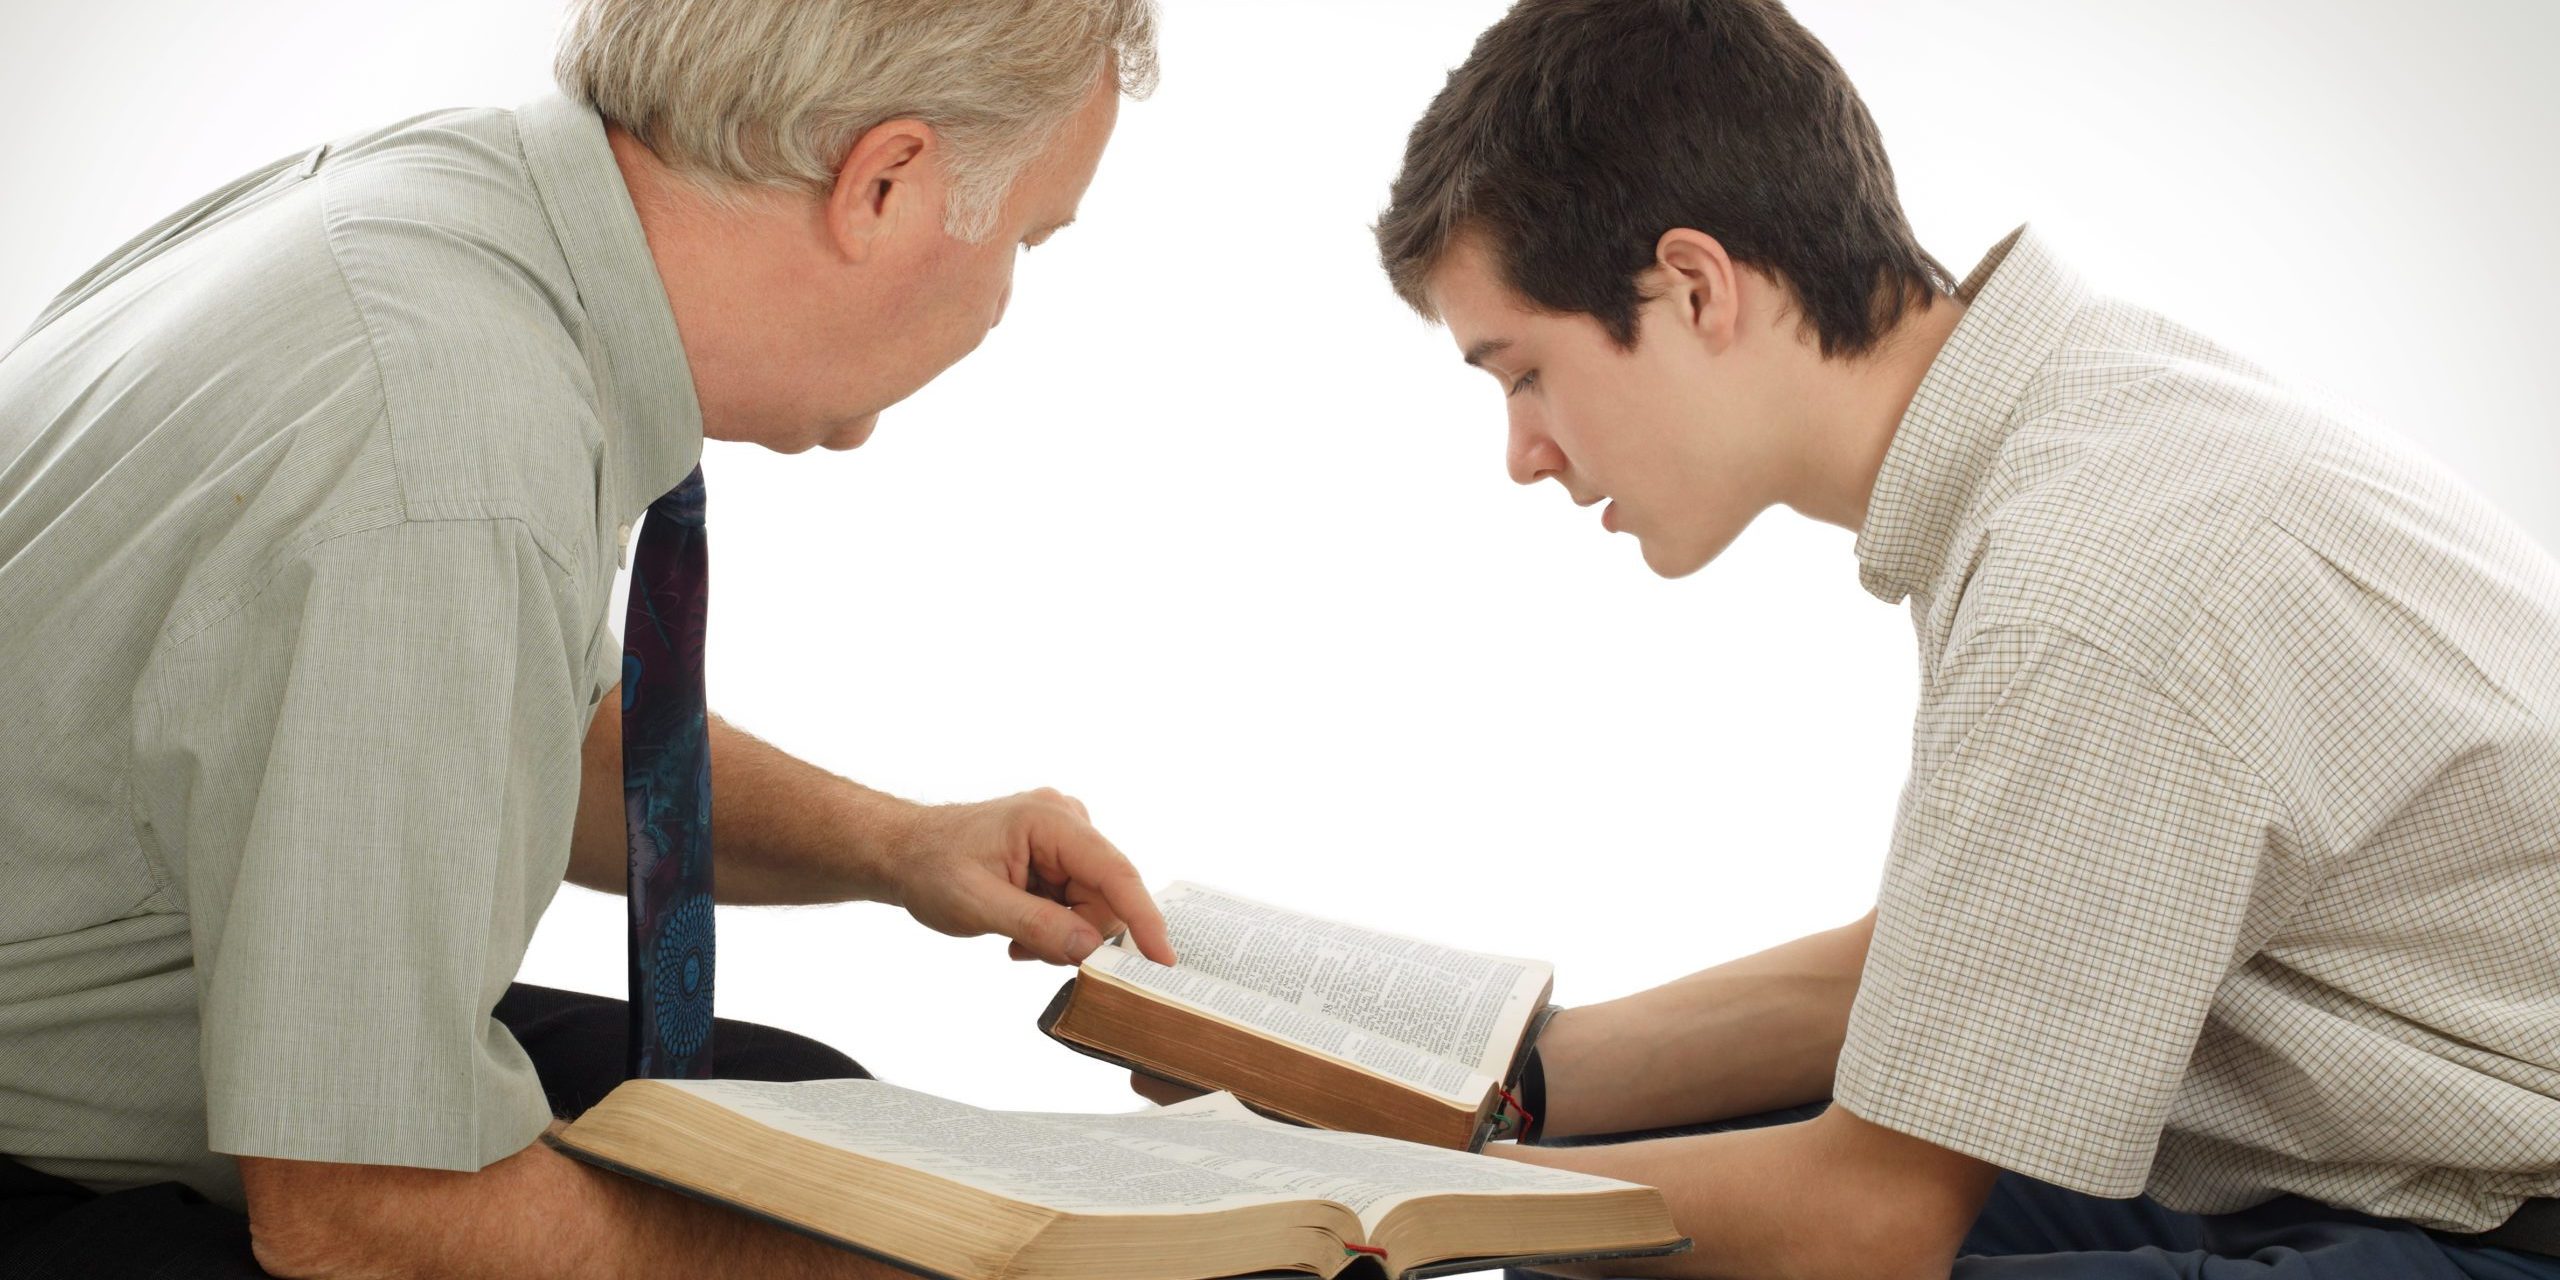 Preacher explains God's Word to a young man